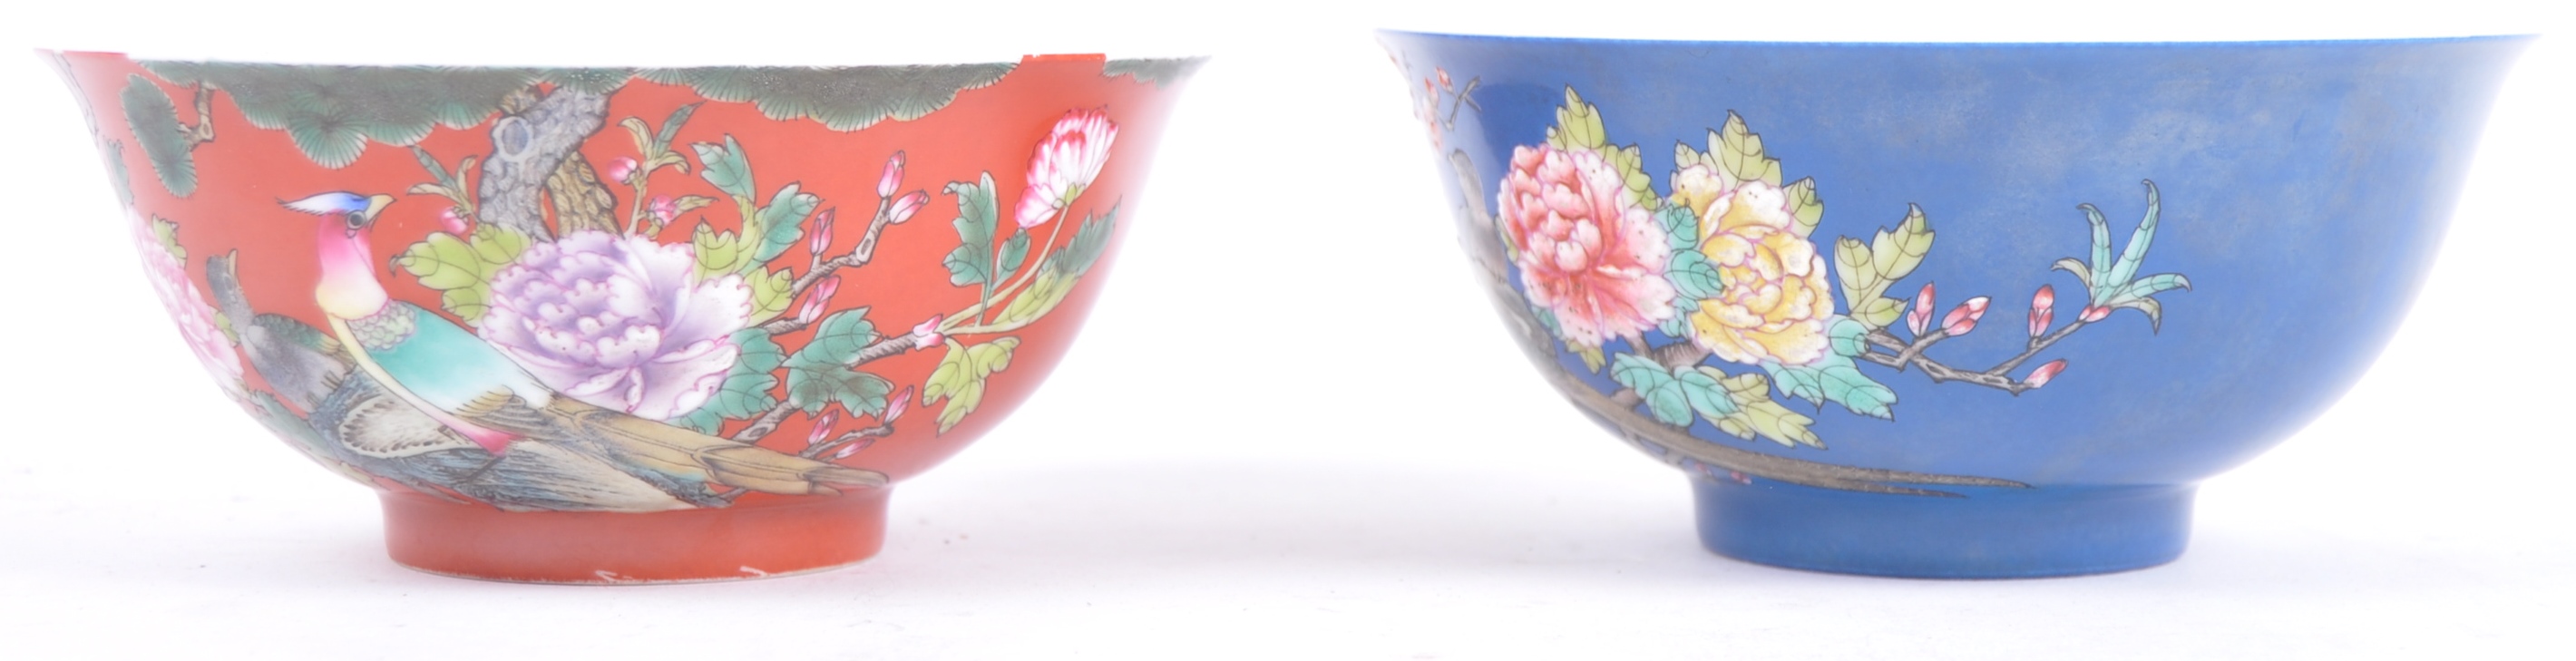 PAIR OF 20TH CENTURY CHINESE REPUBLIC PORCELAIN BOWLS - Image 4 of 6